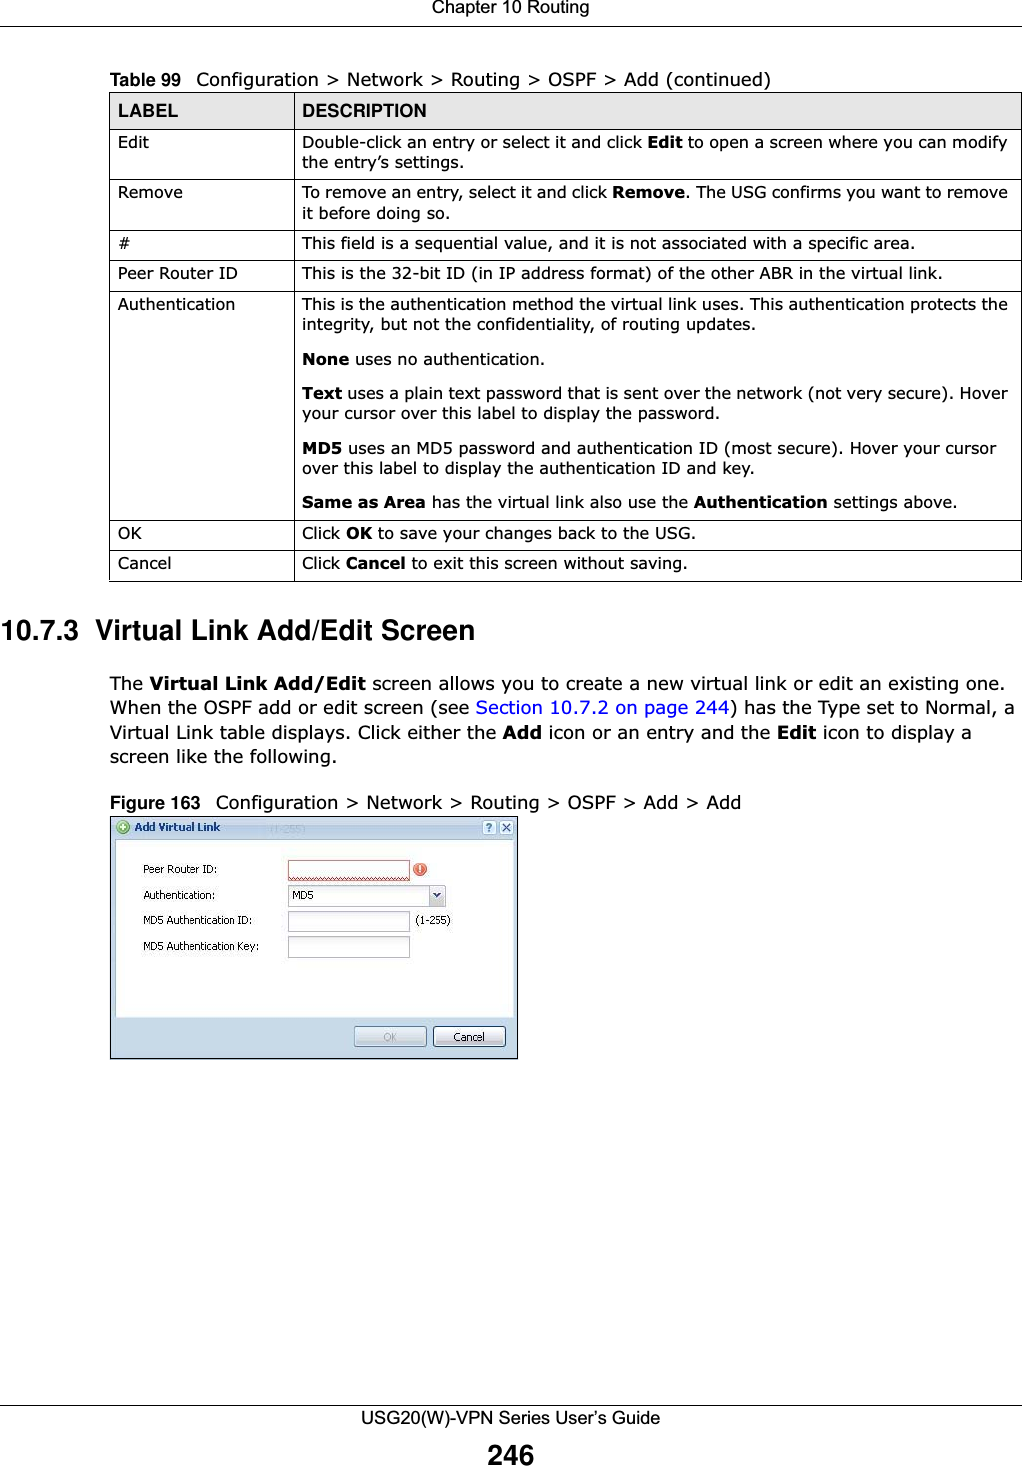 Chapter 10 RoutingUSG20(W)-VPN Series User’s Guide24610.7.3  Virtual Link Add/Edit Screen The Virtual Link Add/Edit screen allows you to create a new virtual link or edit an existing one. When the OSPF add or edit screen (see Section 10.7.2 on page 244) has the Type set to Normal, a Virtual Link table displays. Click either the Add icon or an entry and the Edit icon to display a screen like the following.Figure 163   Configuration &gt; Network &gt; Routing &gt; OSPF &gt; Add &gt; AddEdit Double-click an entry or select it and click Edit to open a screen where you can modify the entry’s settings. Remove To remove an entry, select it and click Remove. The USG confirms you want to remove it before doing so.# This field is a sequential value, and it is not associated with a specific area.Peer Router ID This is the 32-bit ID (in IP address format) of the other ABR in the virtual link.Authentication This is the authentication method the virtual link uses. This authentication protects the integrity, but not the confidentiality, of routing updates. None uses no authentication.Text uses a plain text password that is sent over the network (not very secure). Hover your cursor over this label to display the password.MD5 uses an MD5 password and authentication ID (most secure). Hover your cursor over this label to display the authentication ID and key.Same as Area has the virtual link also use the Authentication settings above.OK Click OK to save your changes back to the USG.Cancel Click Cancel to exit this screen without saving.Table 99   Configuration &gt; Network &gt; Routing &gt; OSPF &gt; Add (continued)LABEL DESCRIPTION